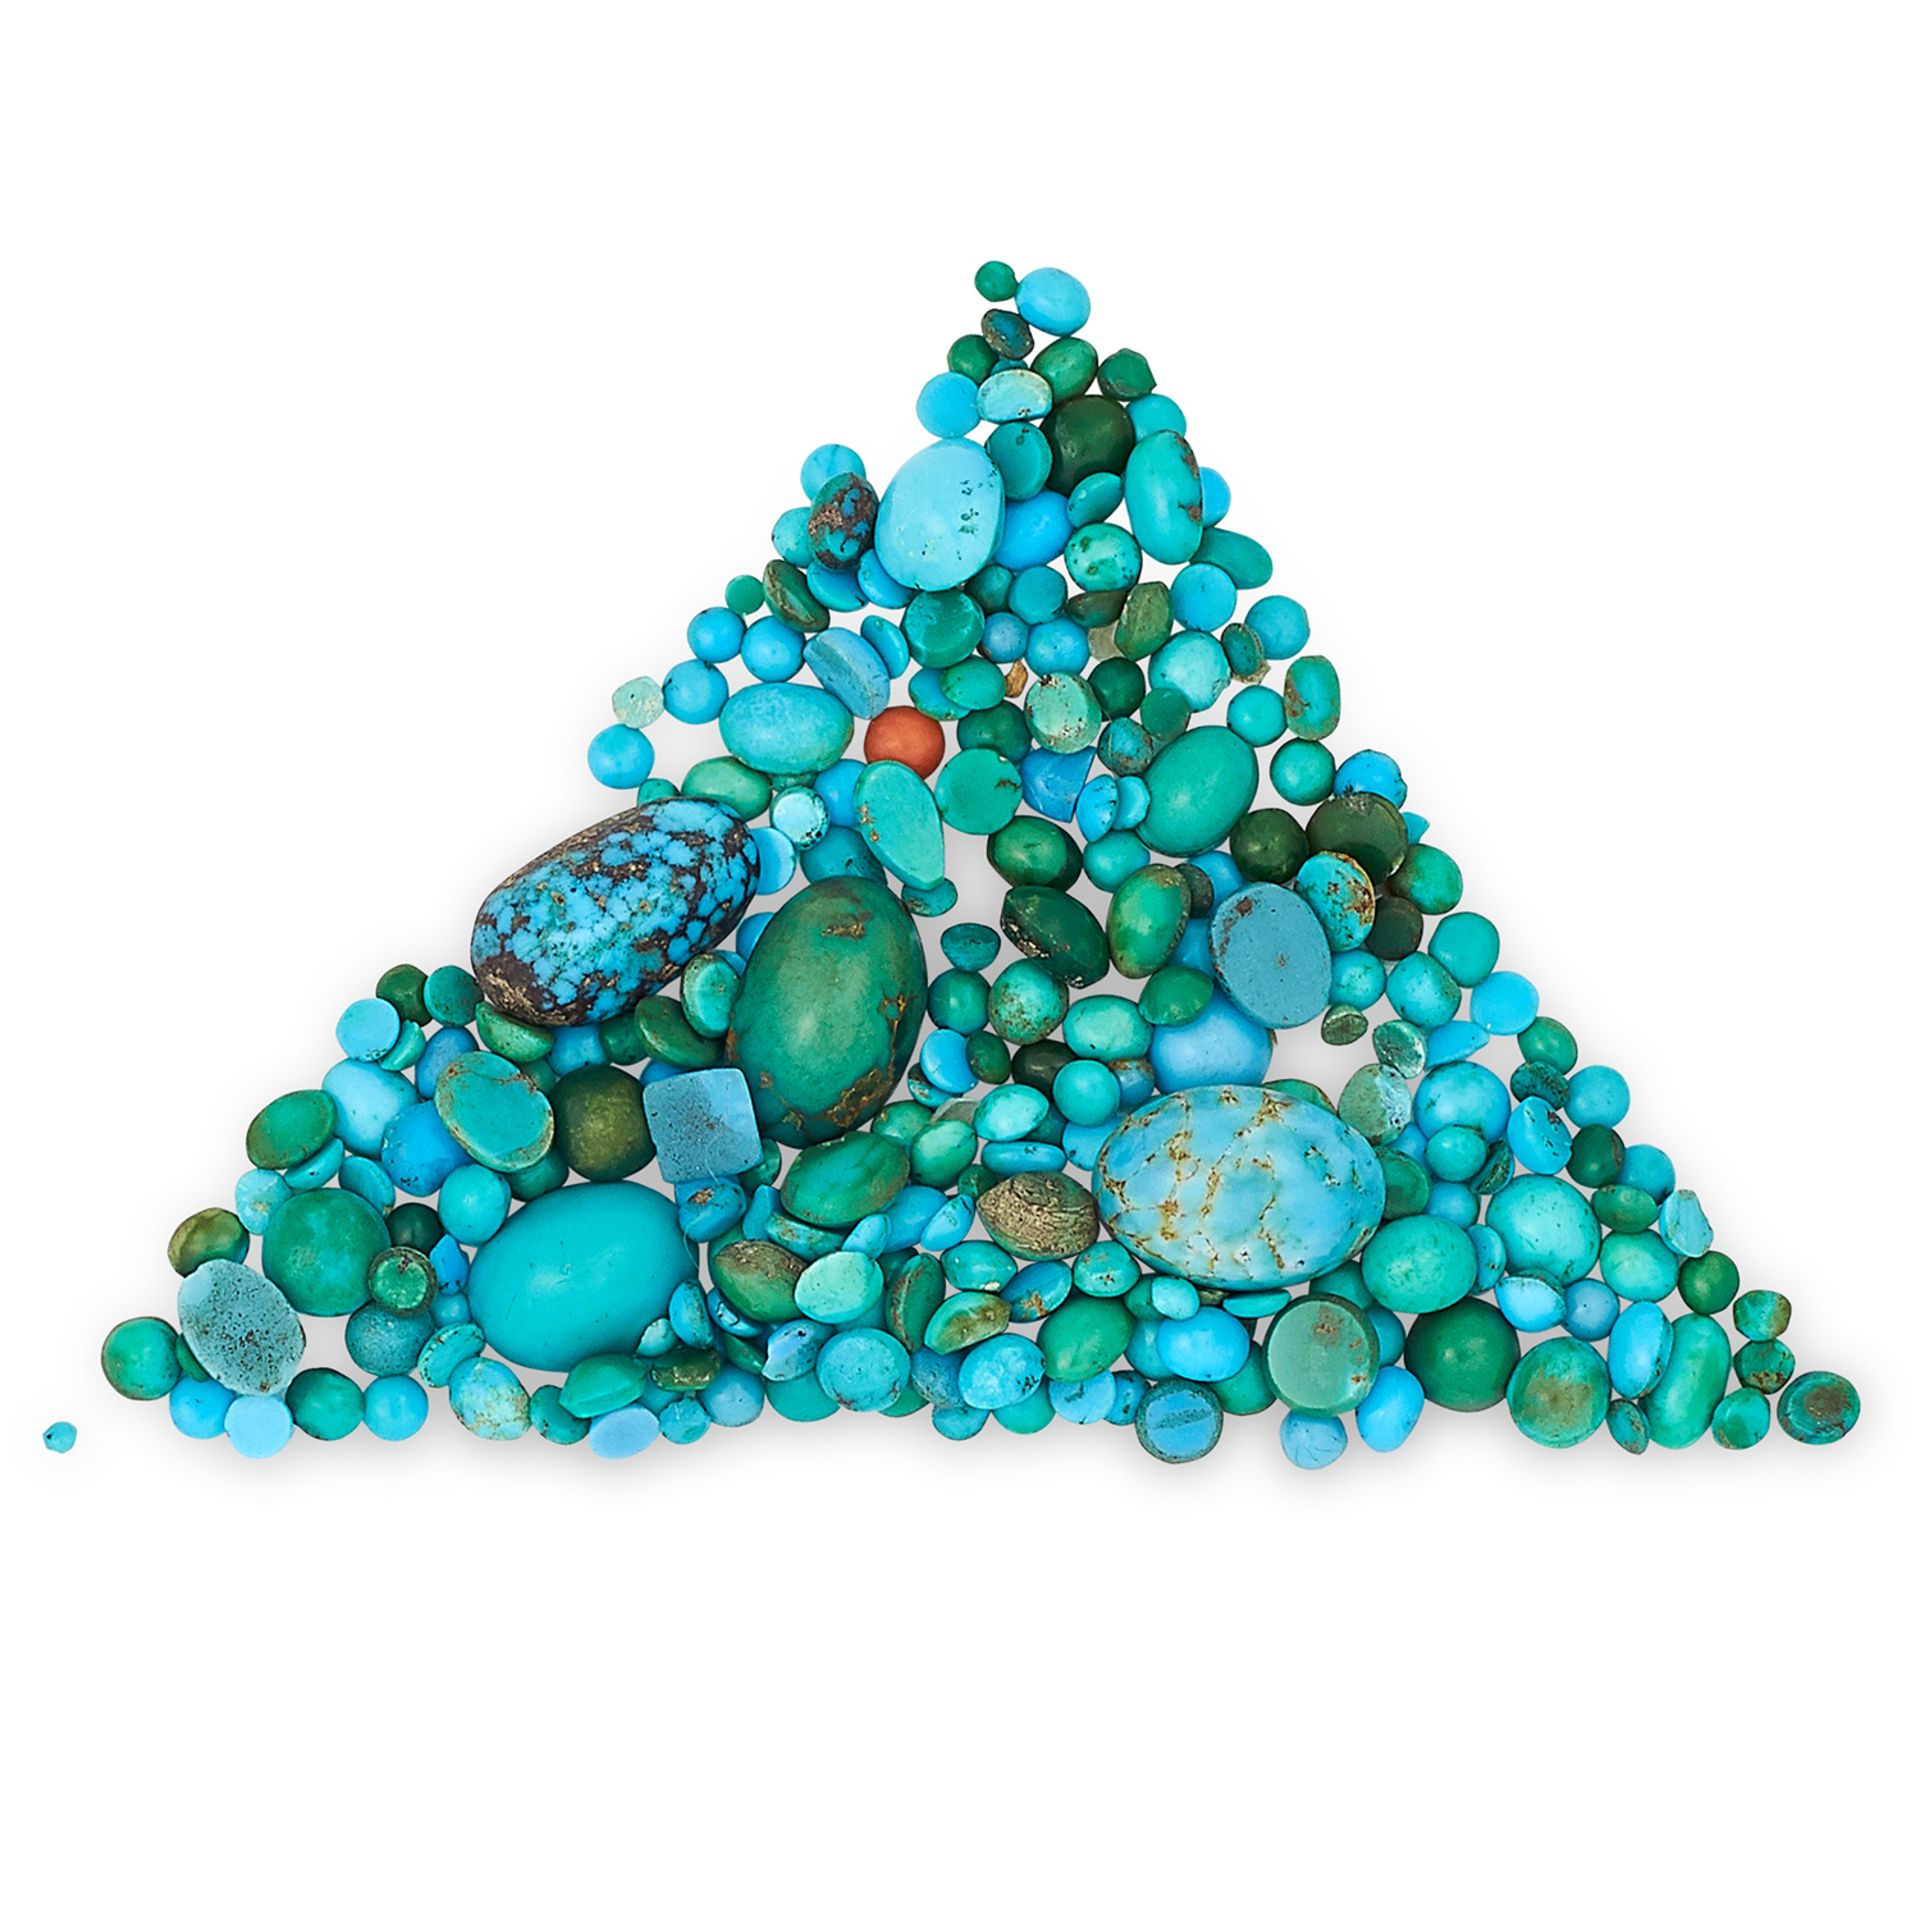 PARCEL OF CABOCHON TURQUOISE of assorted sizes, 70.0 carat total weight.